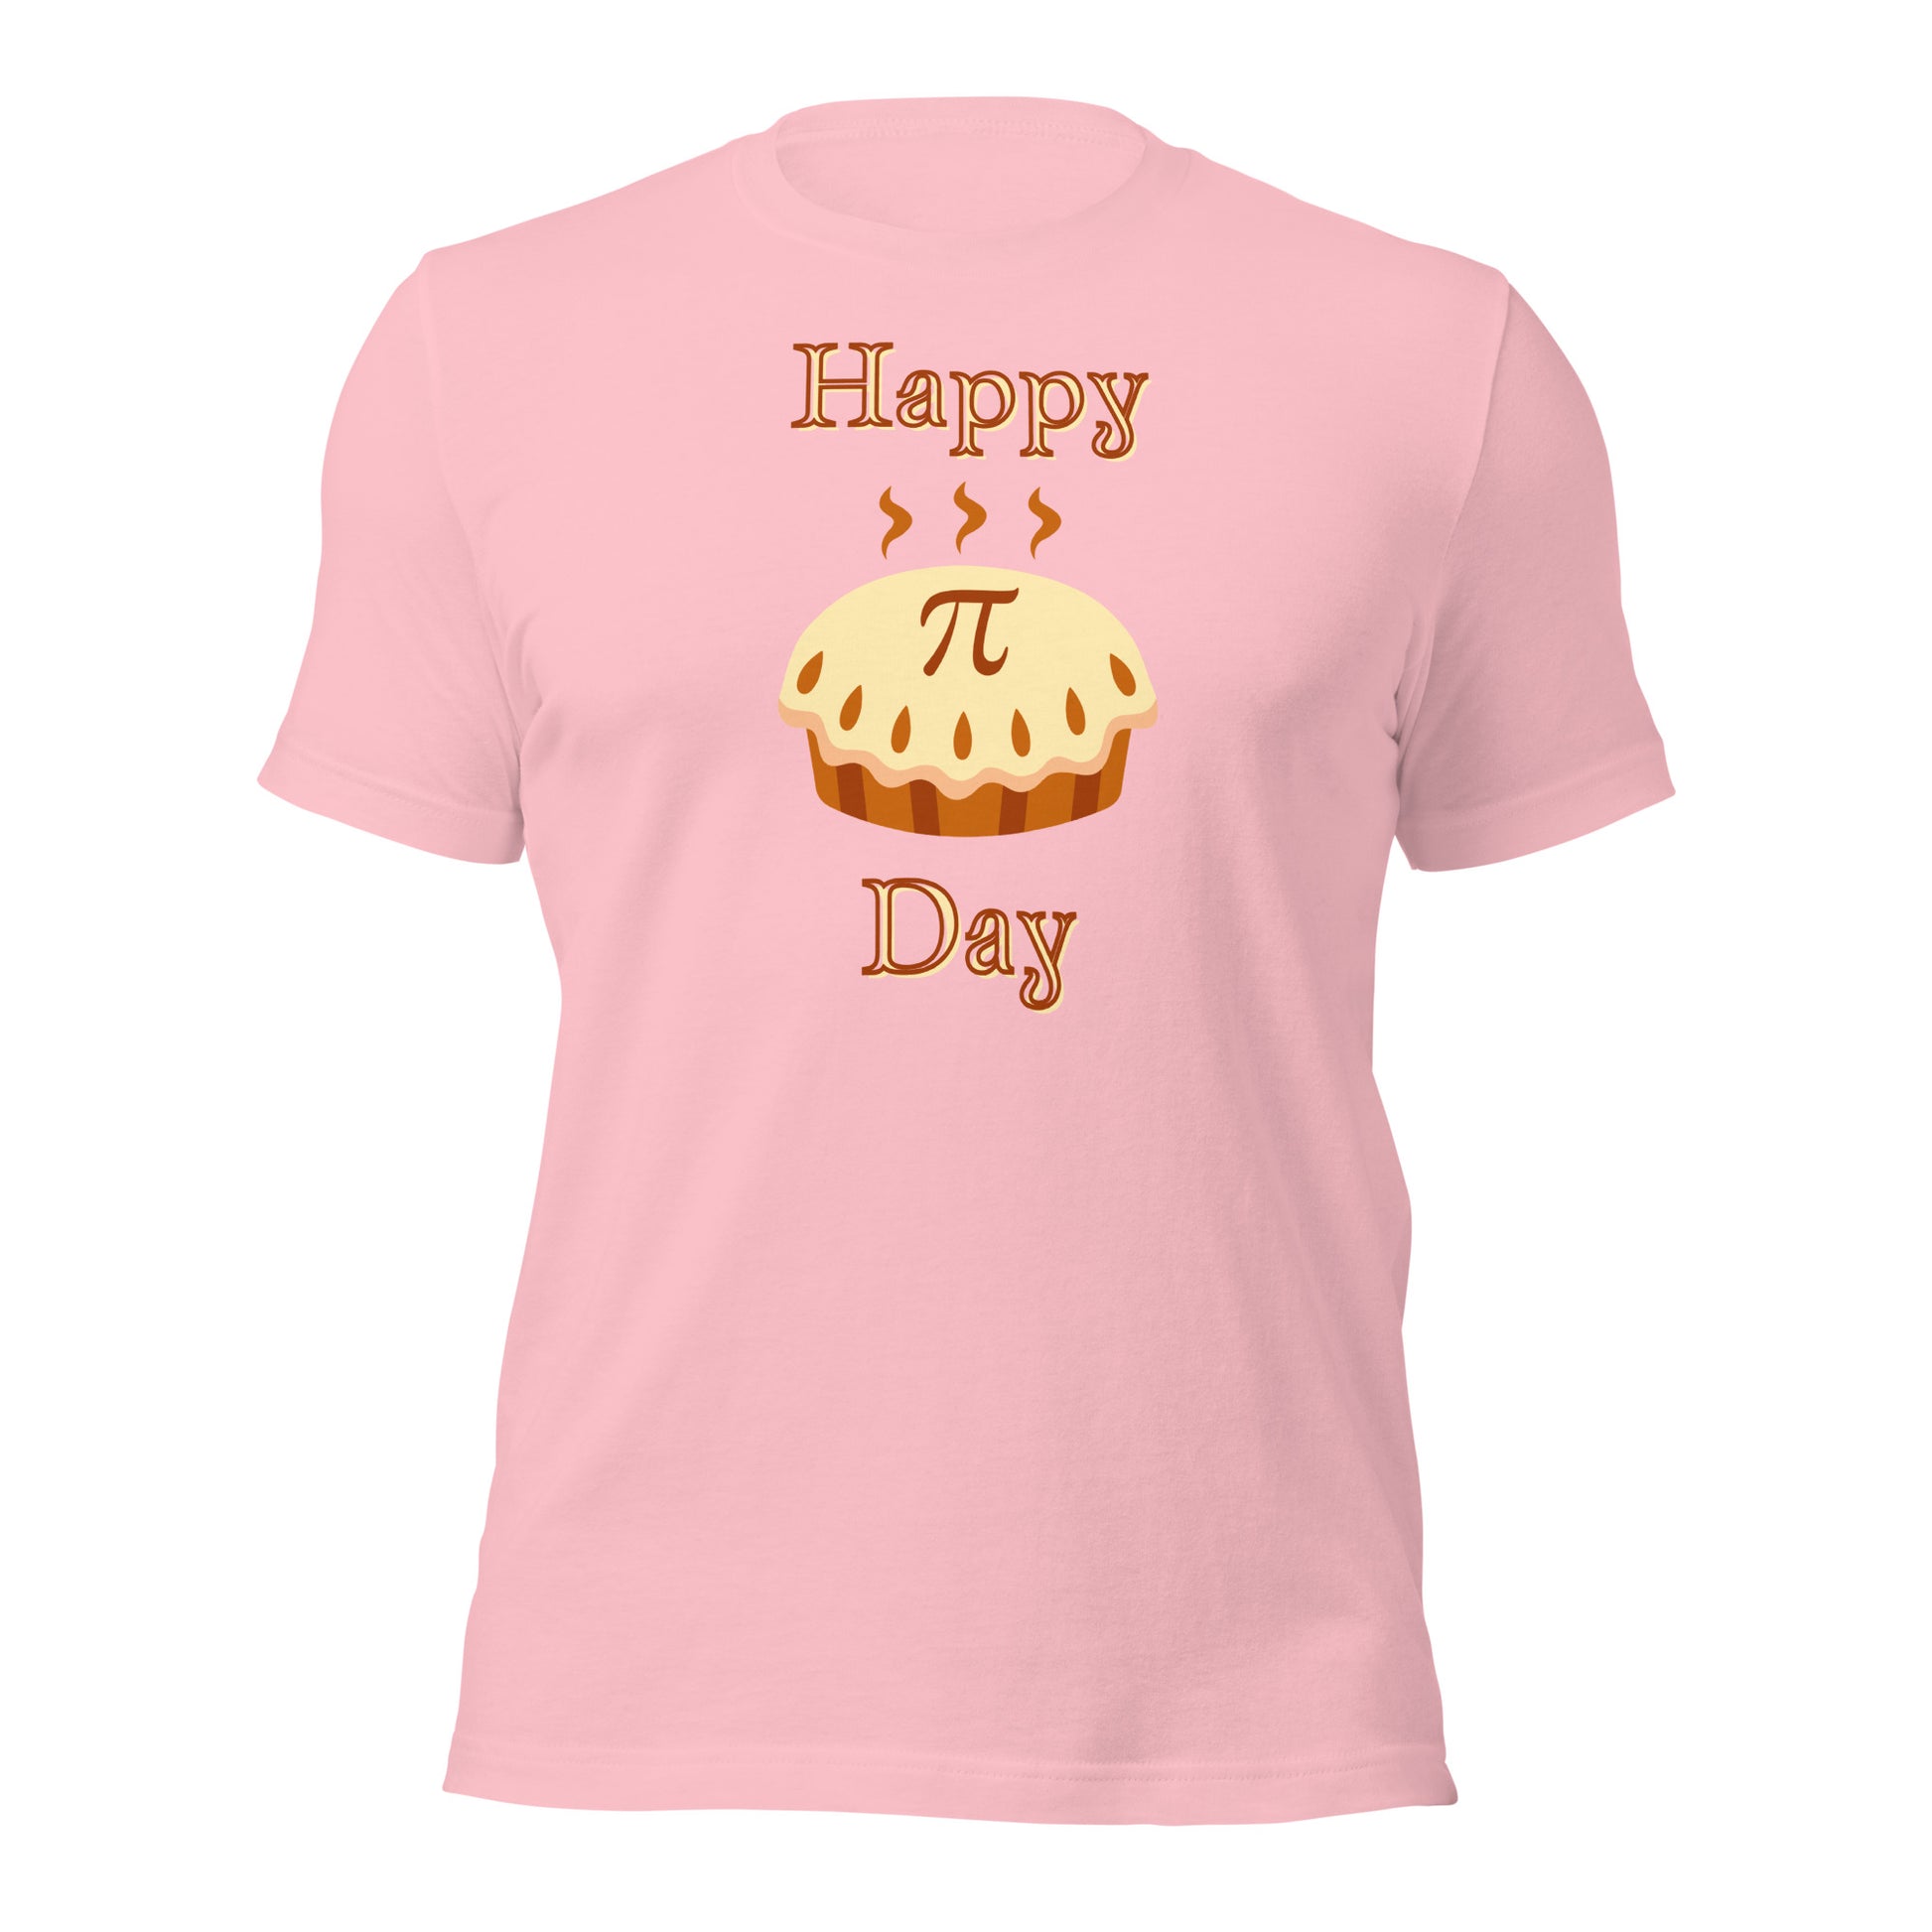 Math and dessert themed shirt for Pi Day